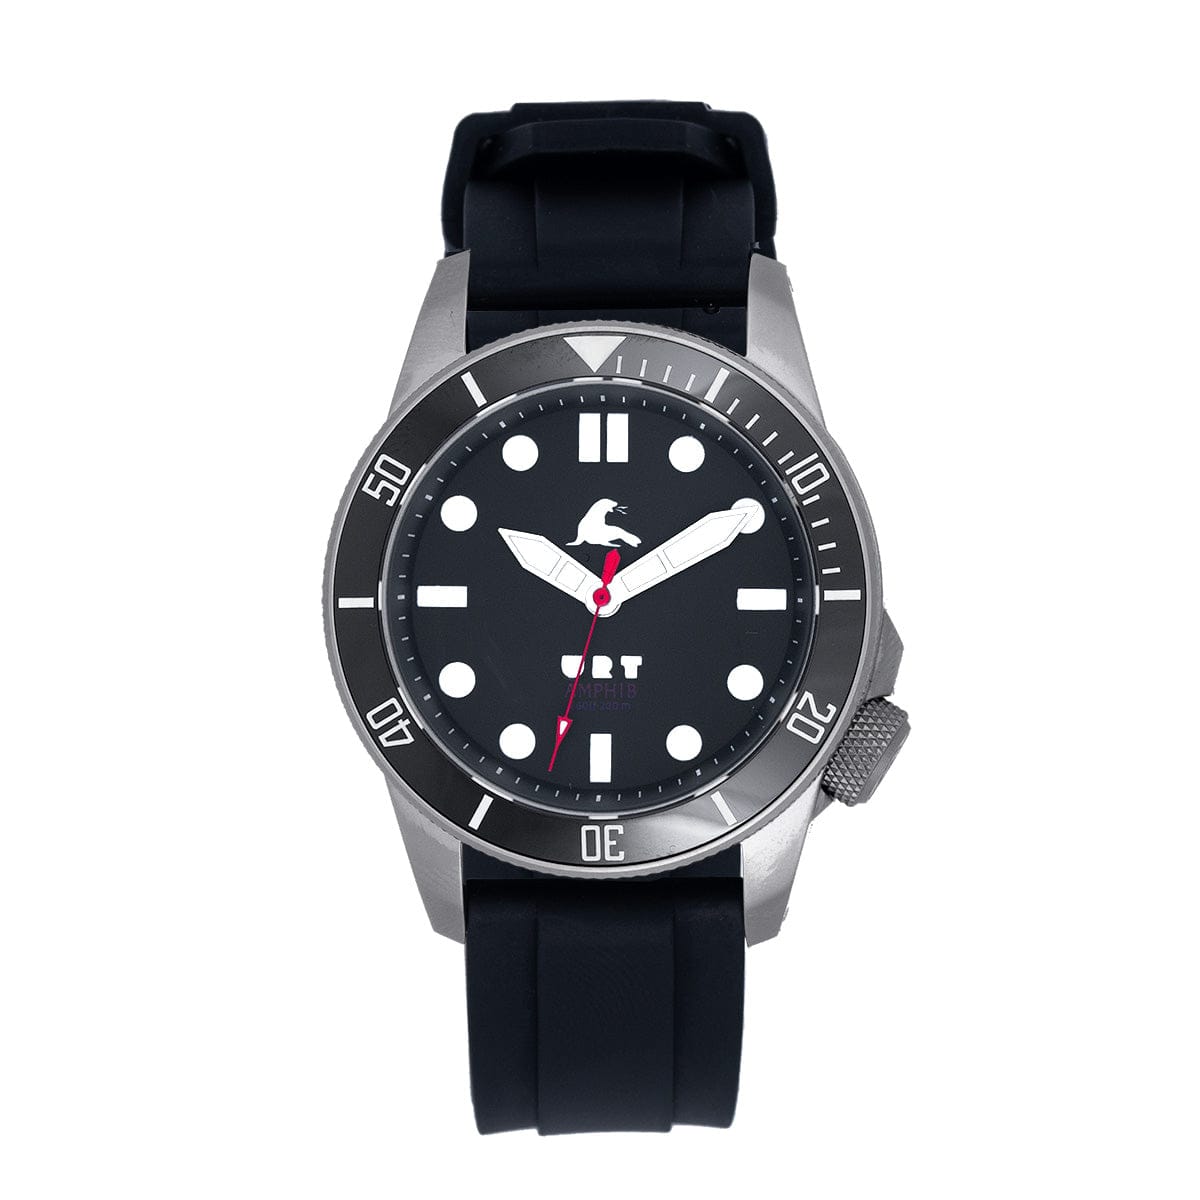 The Amphib Dive Watch // Stainless Steel